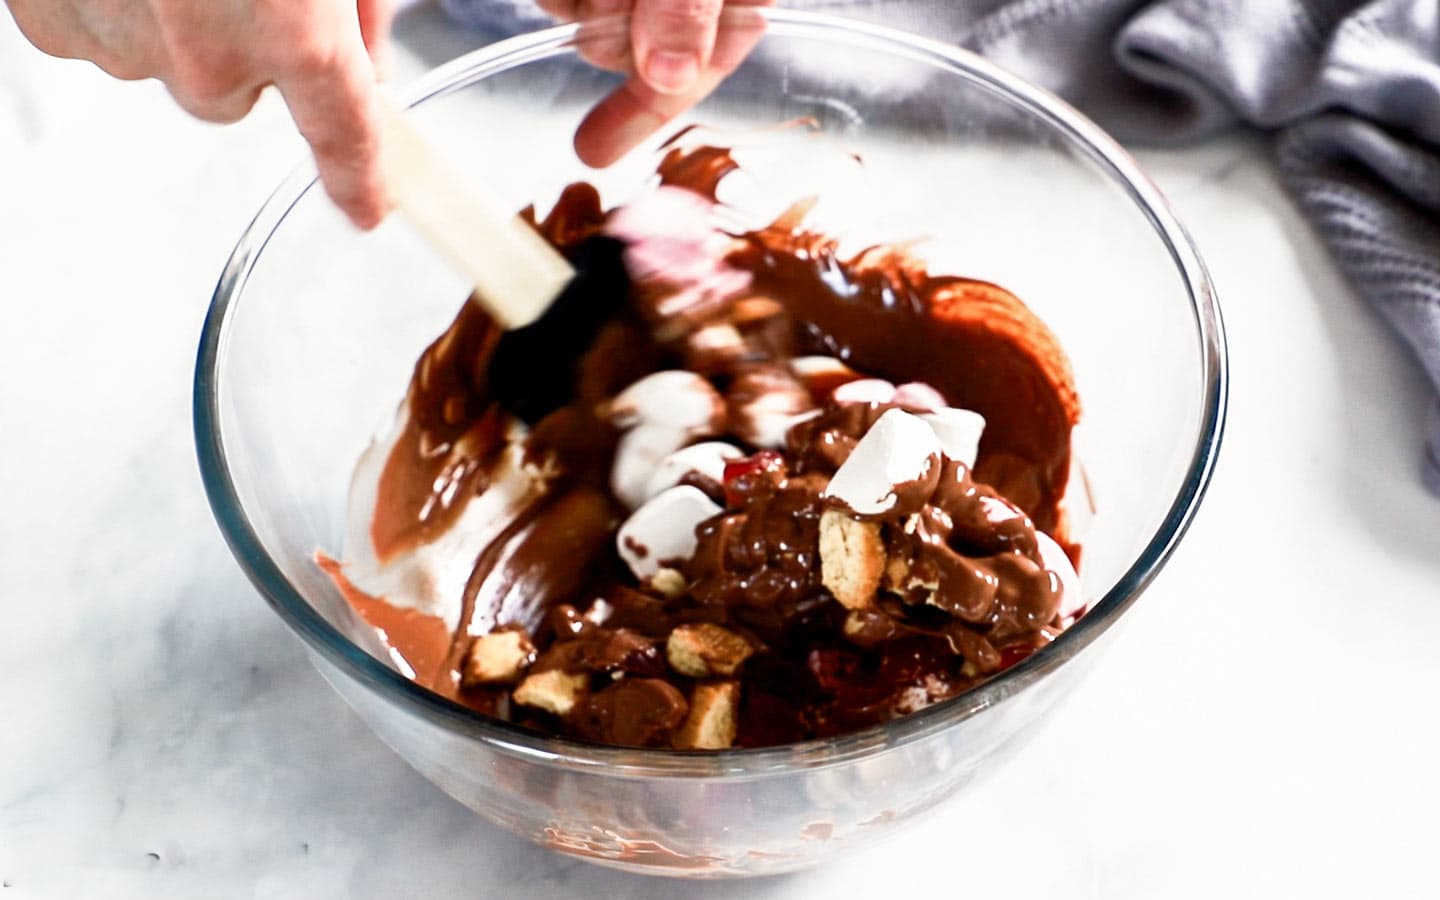 Rocky road ingredients being mixed in a bowl.